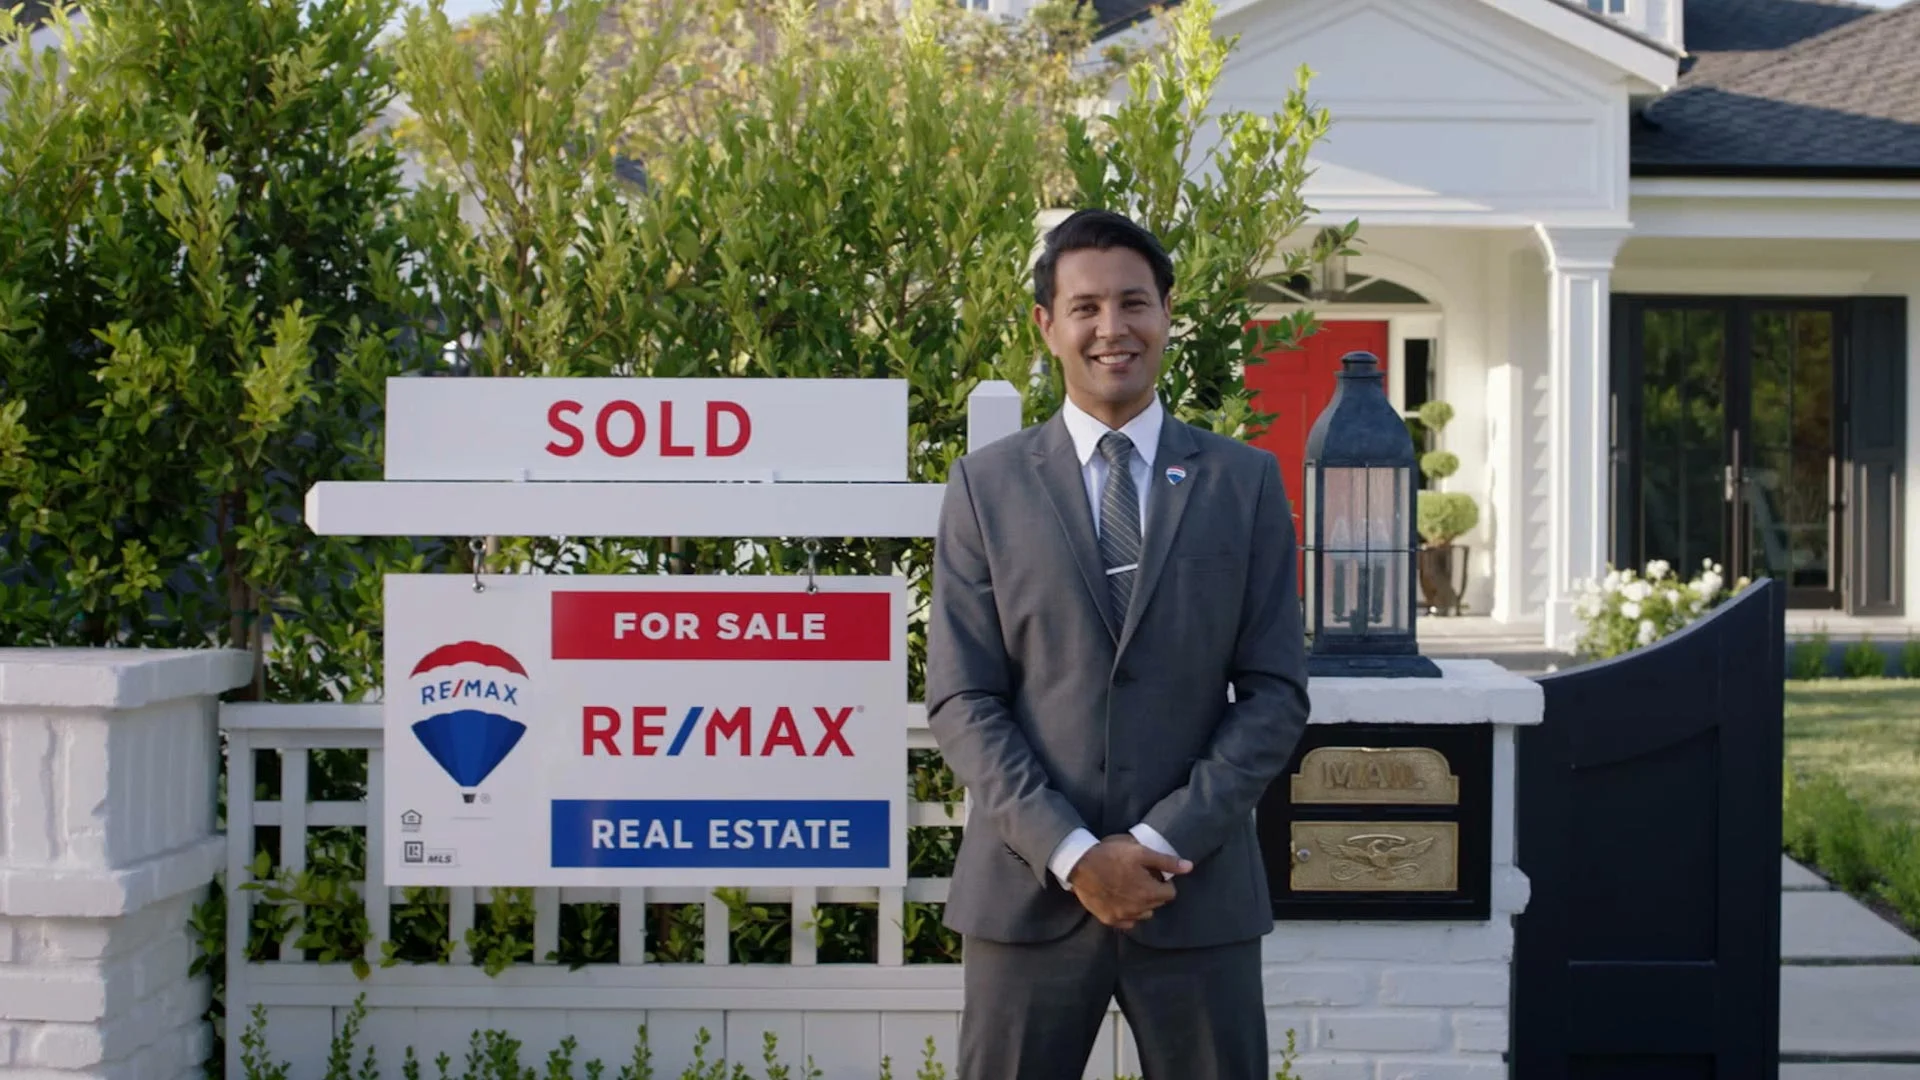 A real estate agent standing in front of a house with a RE/MAX "Sold" sign